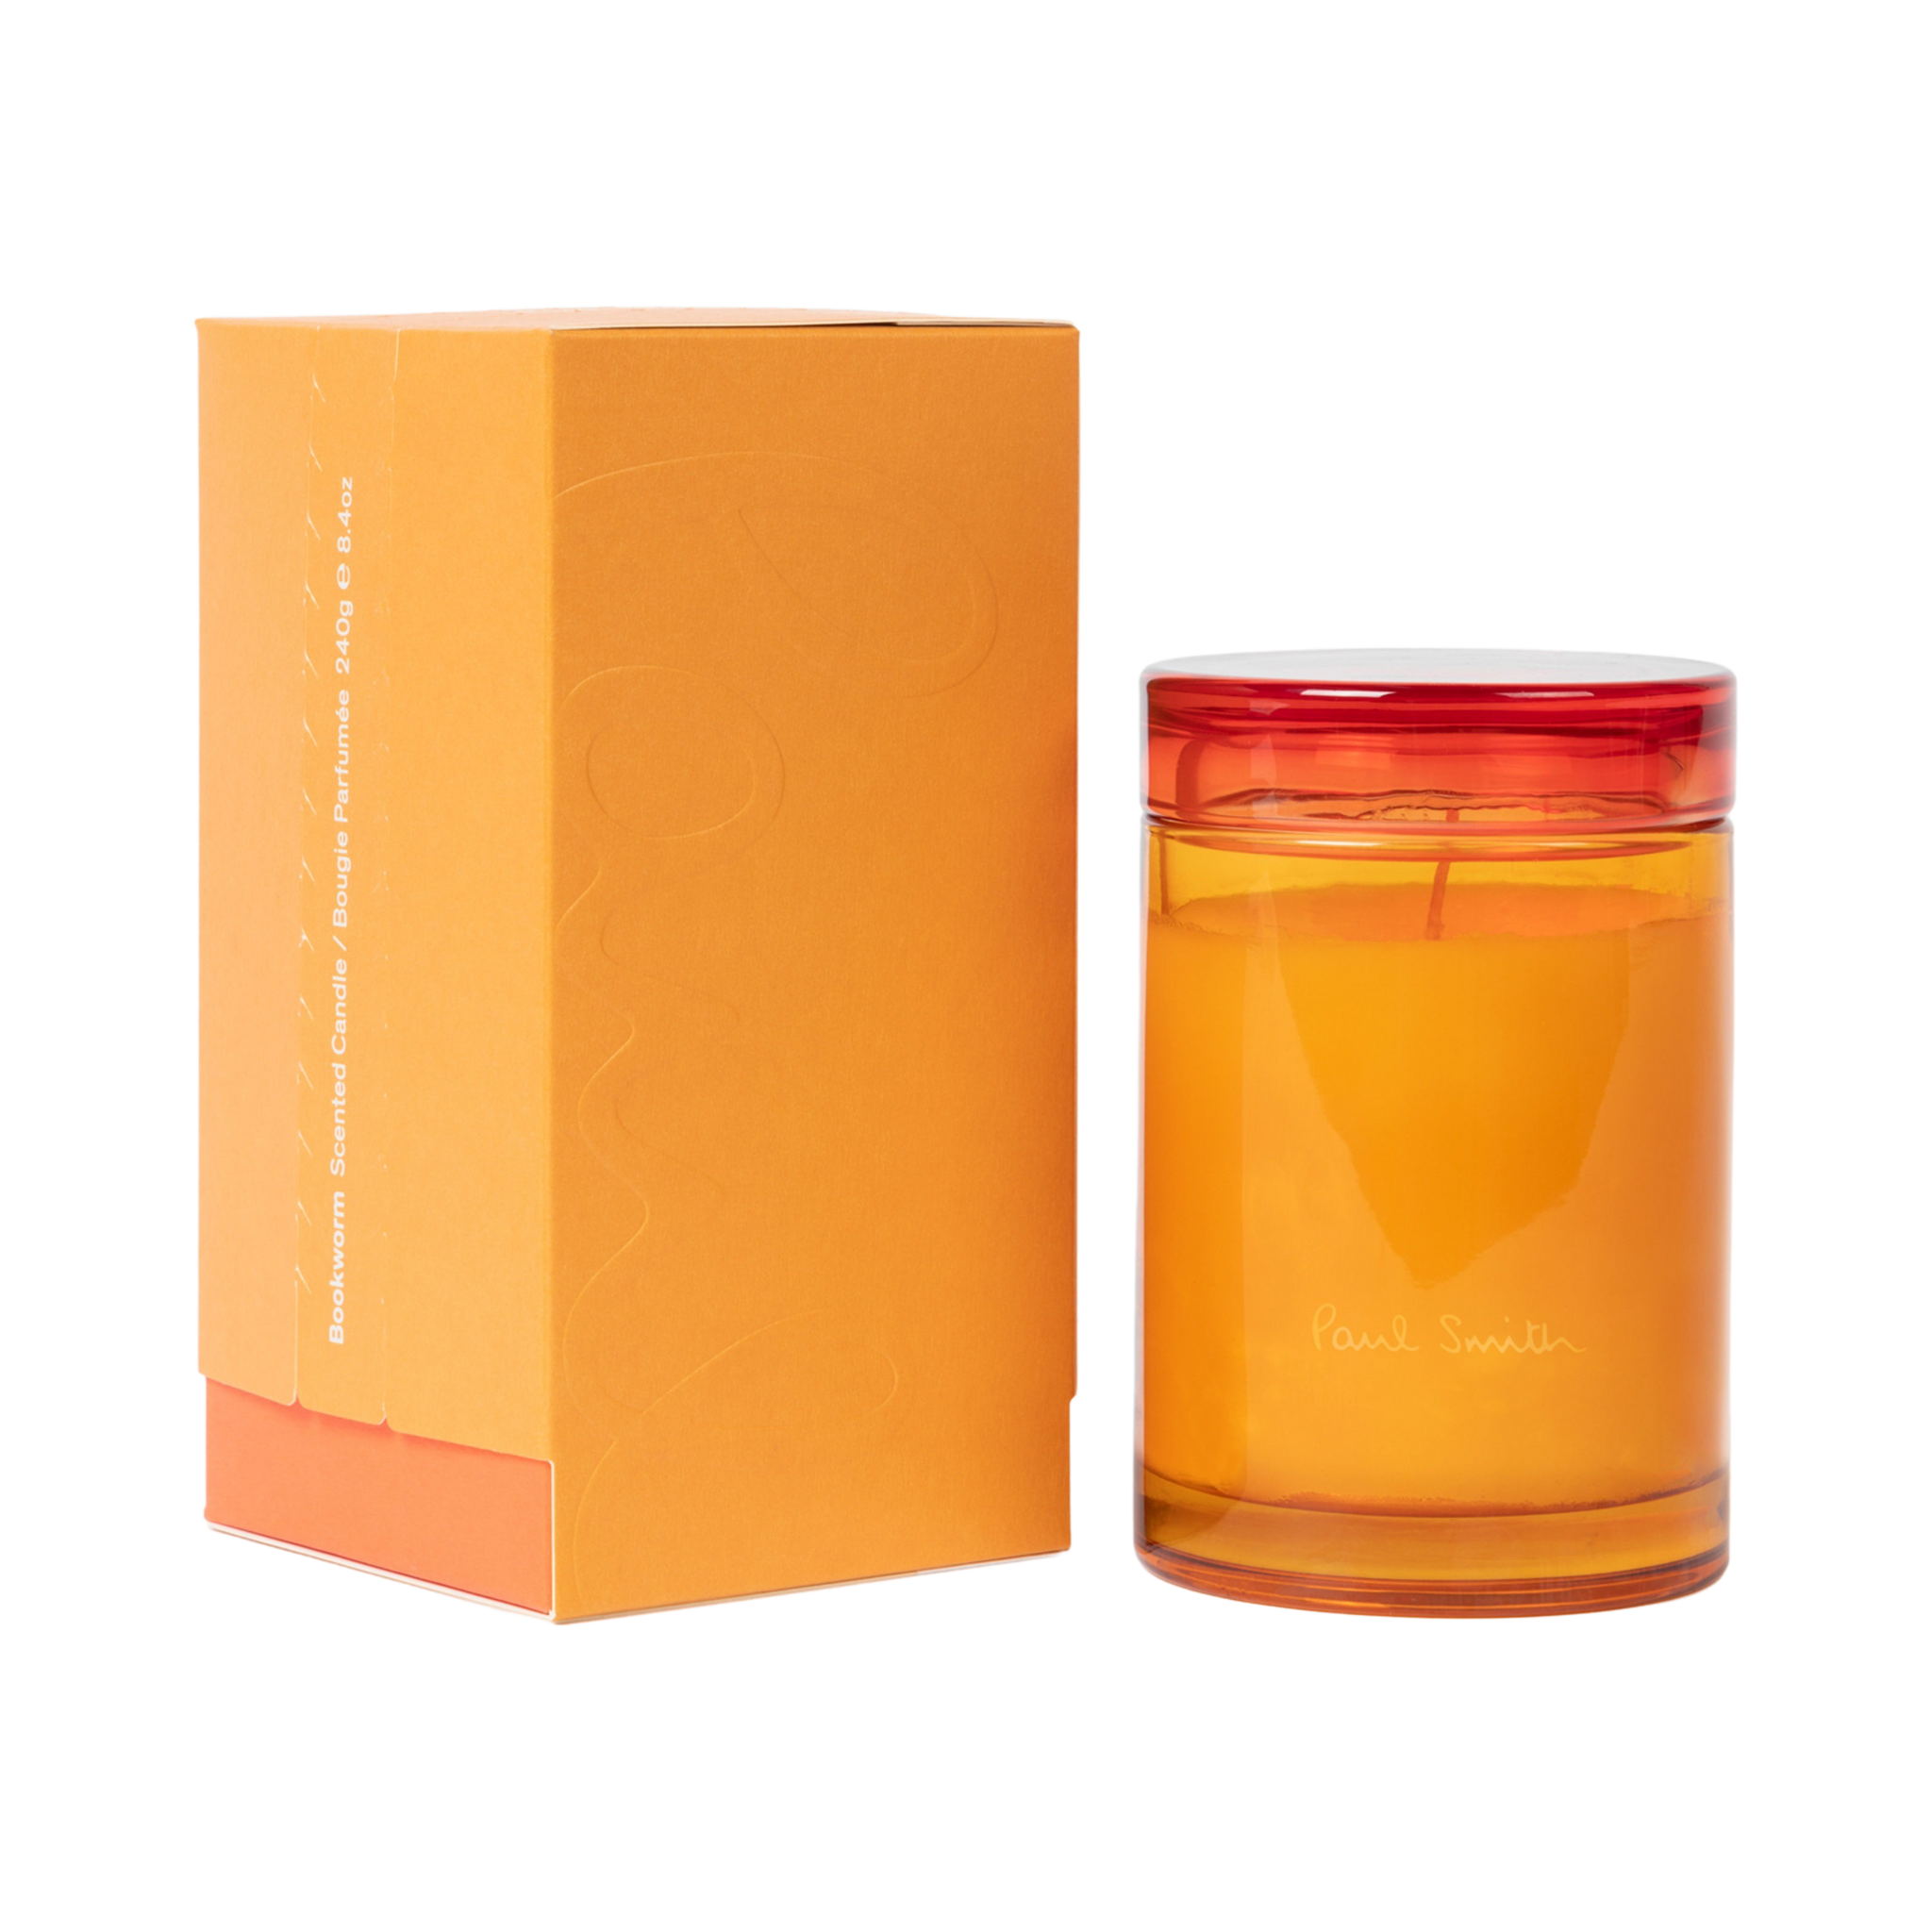 88570 Paul Smith BOOKWORM Candle 240g